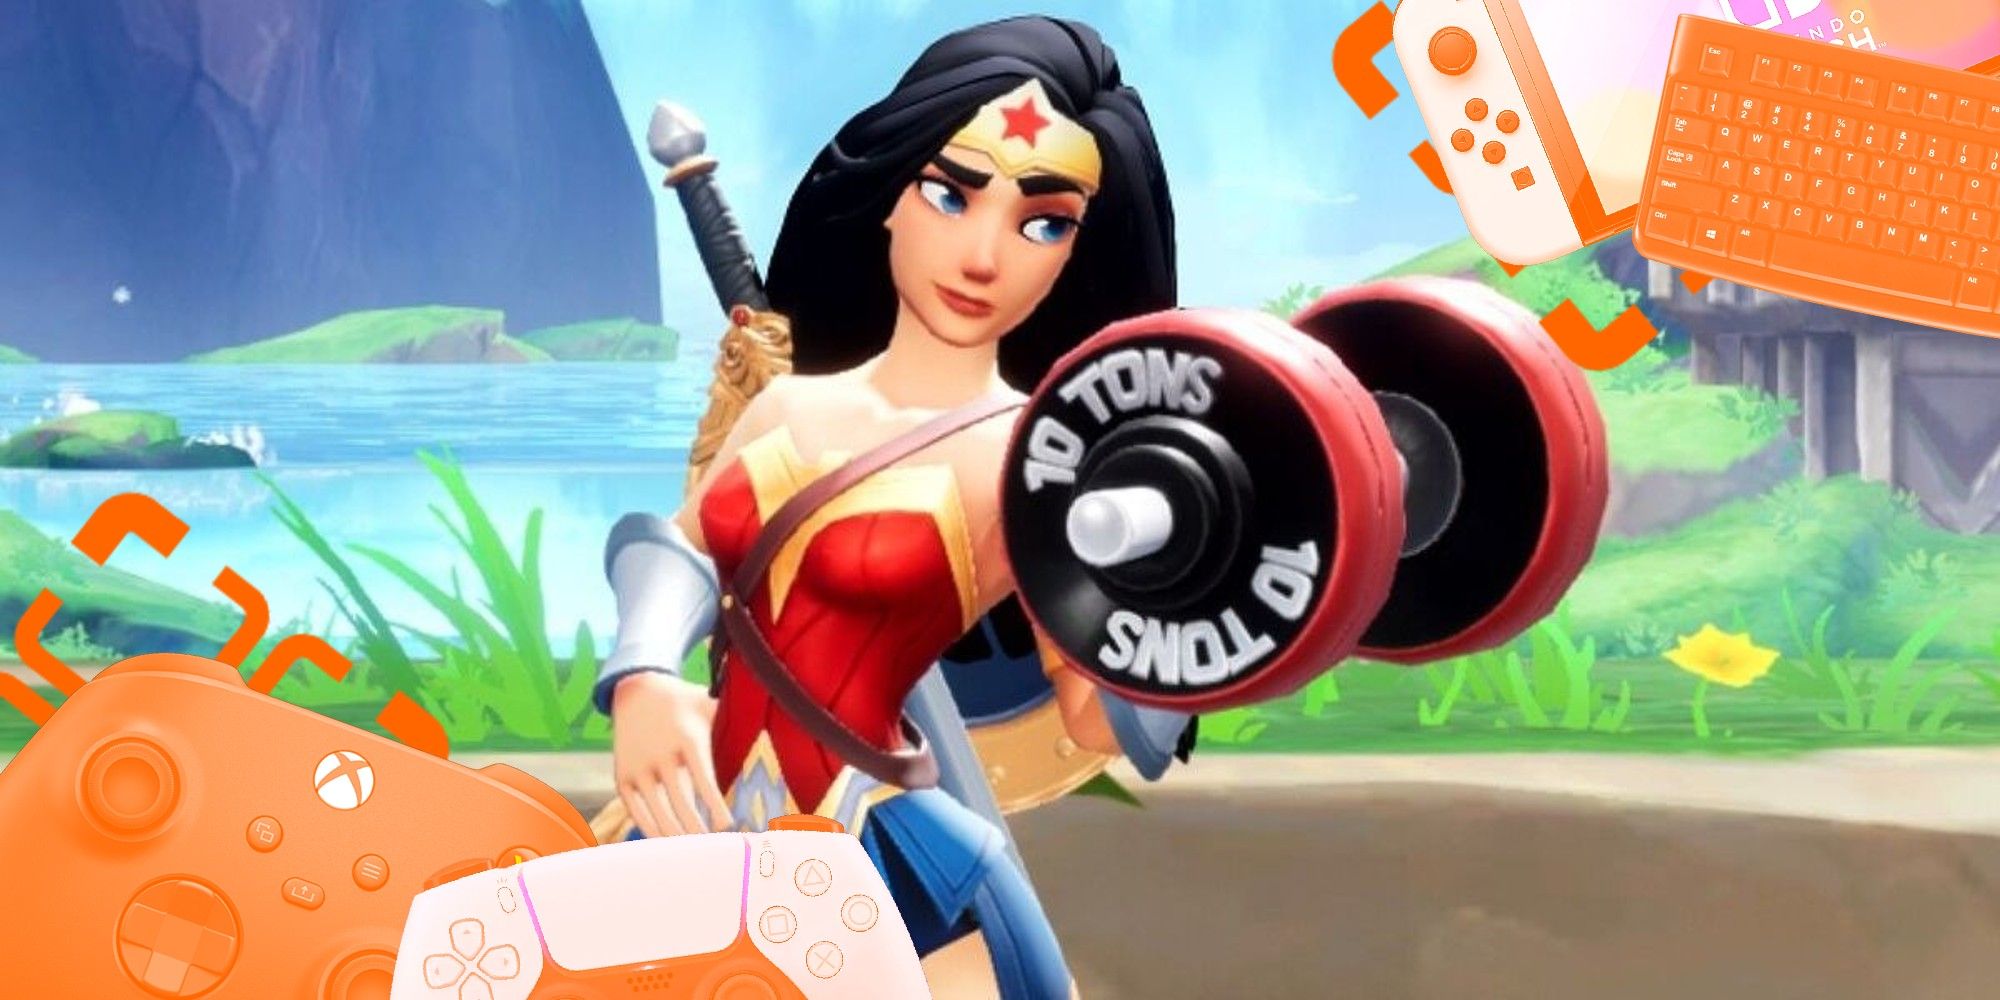 Wonder Woman Lifting A Weight Labeled 10 Tons With Game Controller Overlay